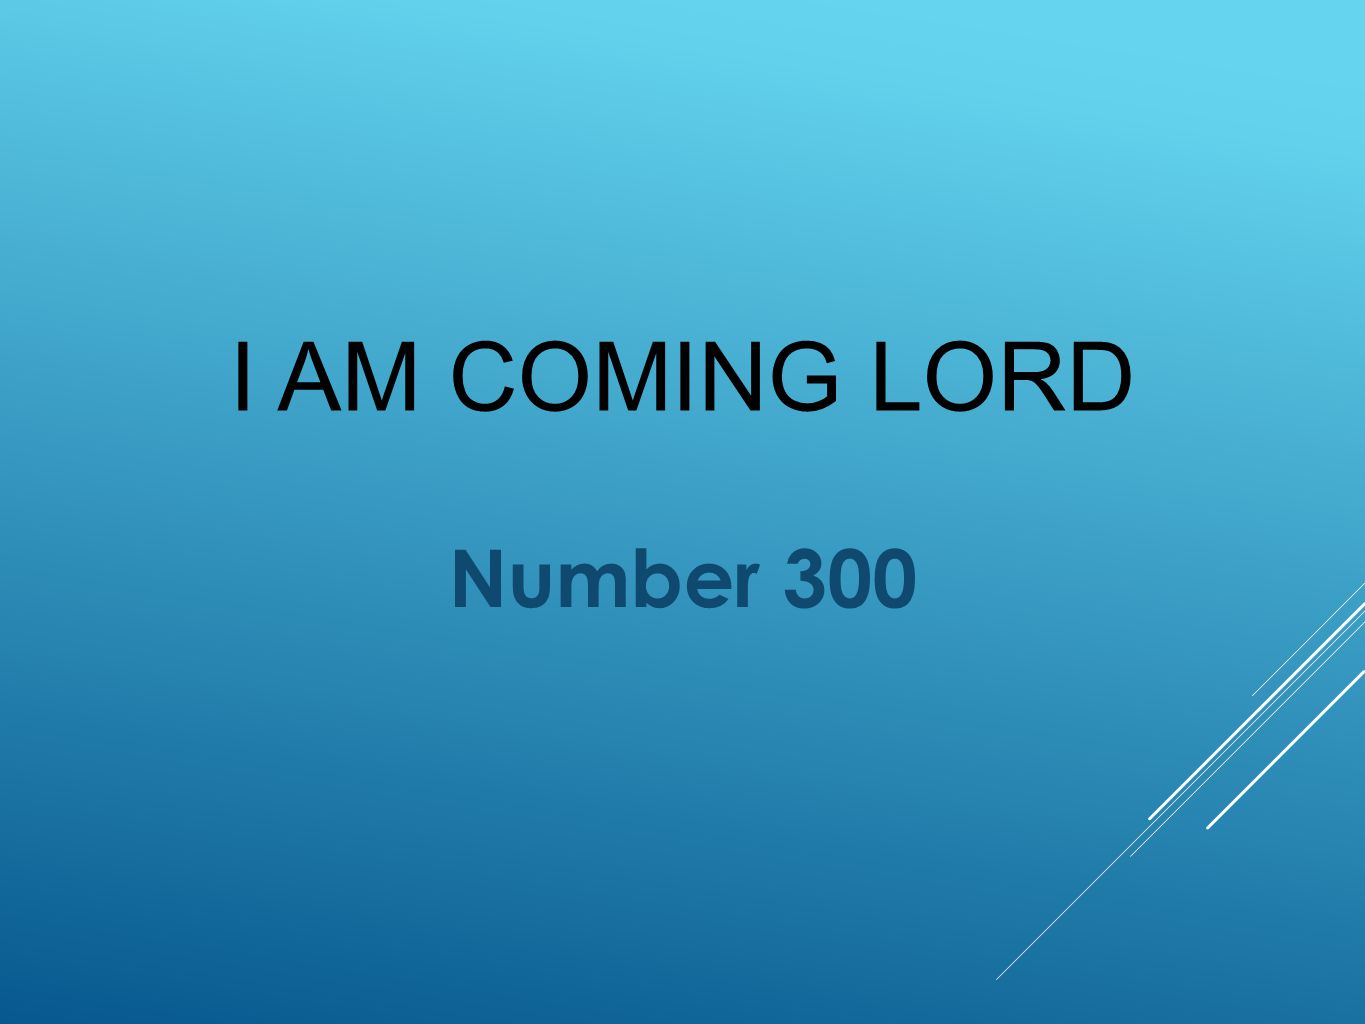 I AM COMING LORD Number 300